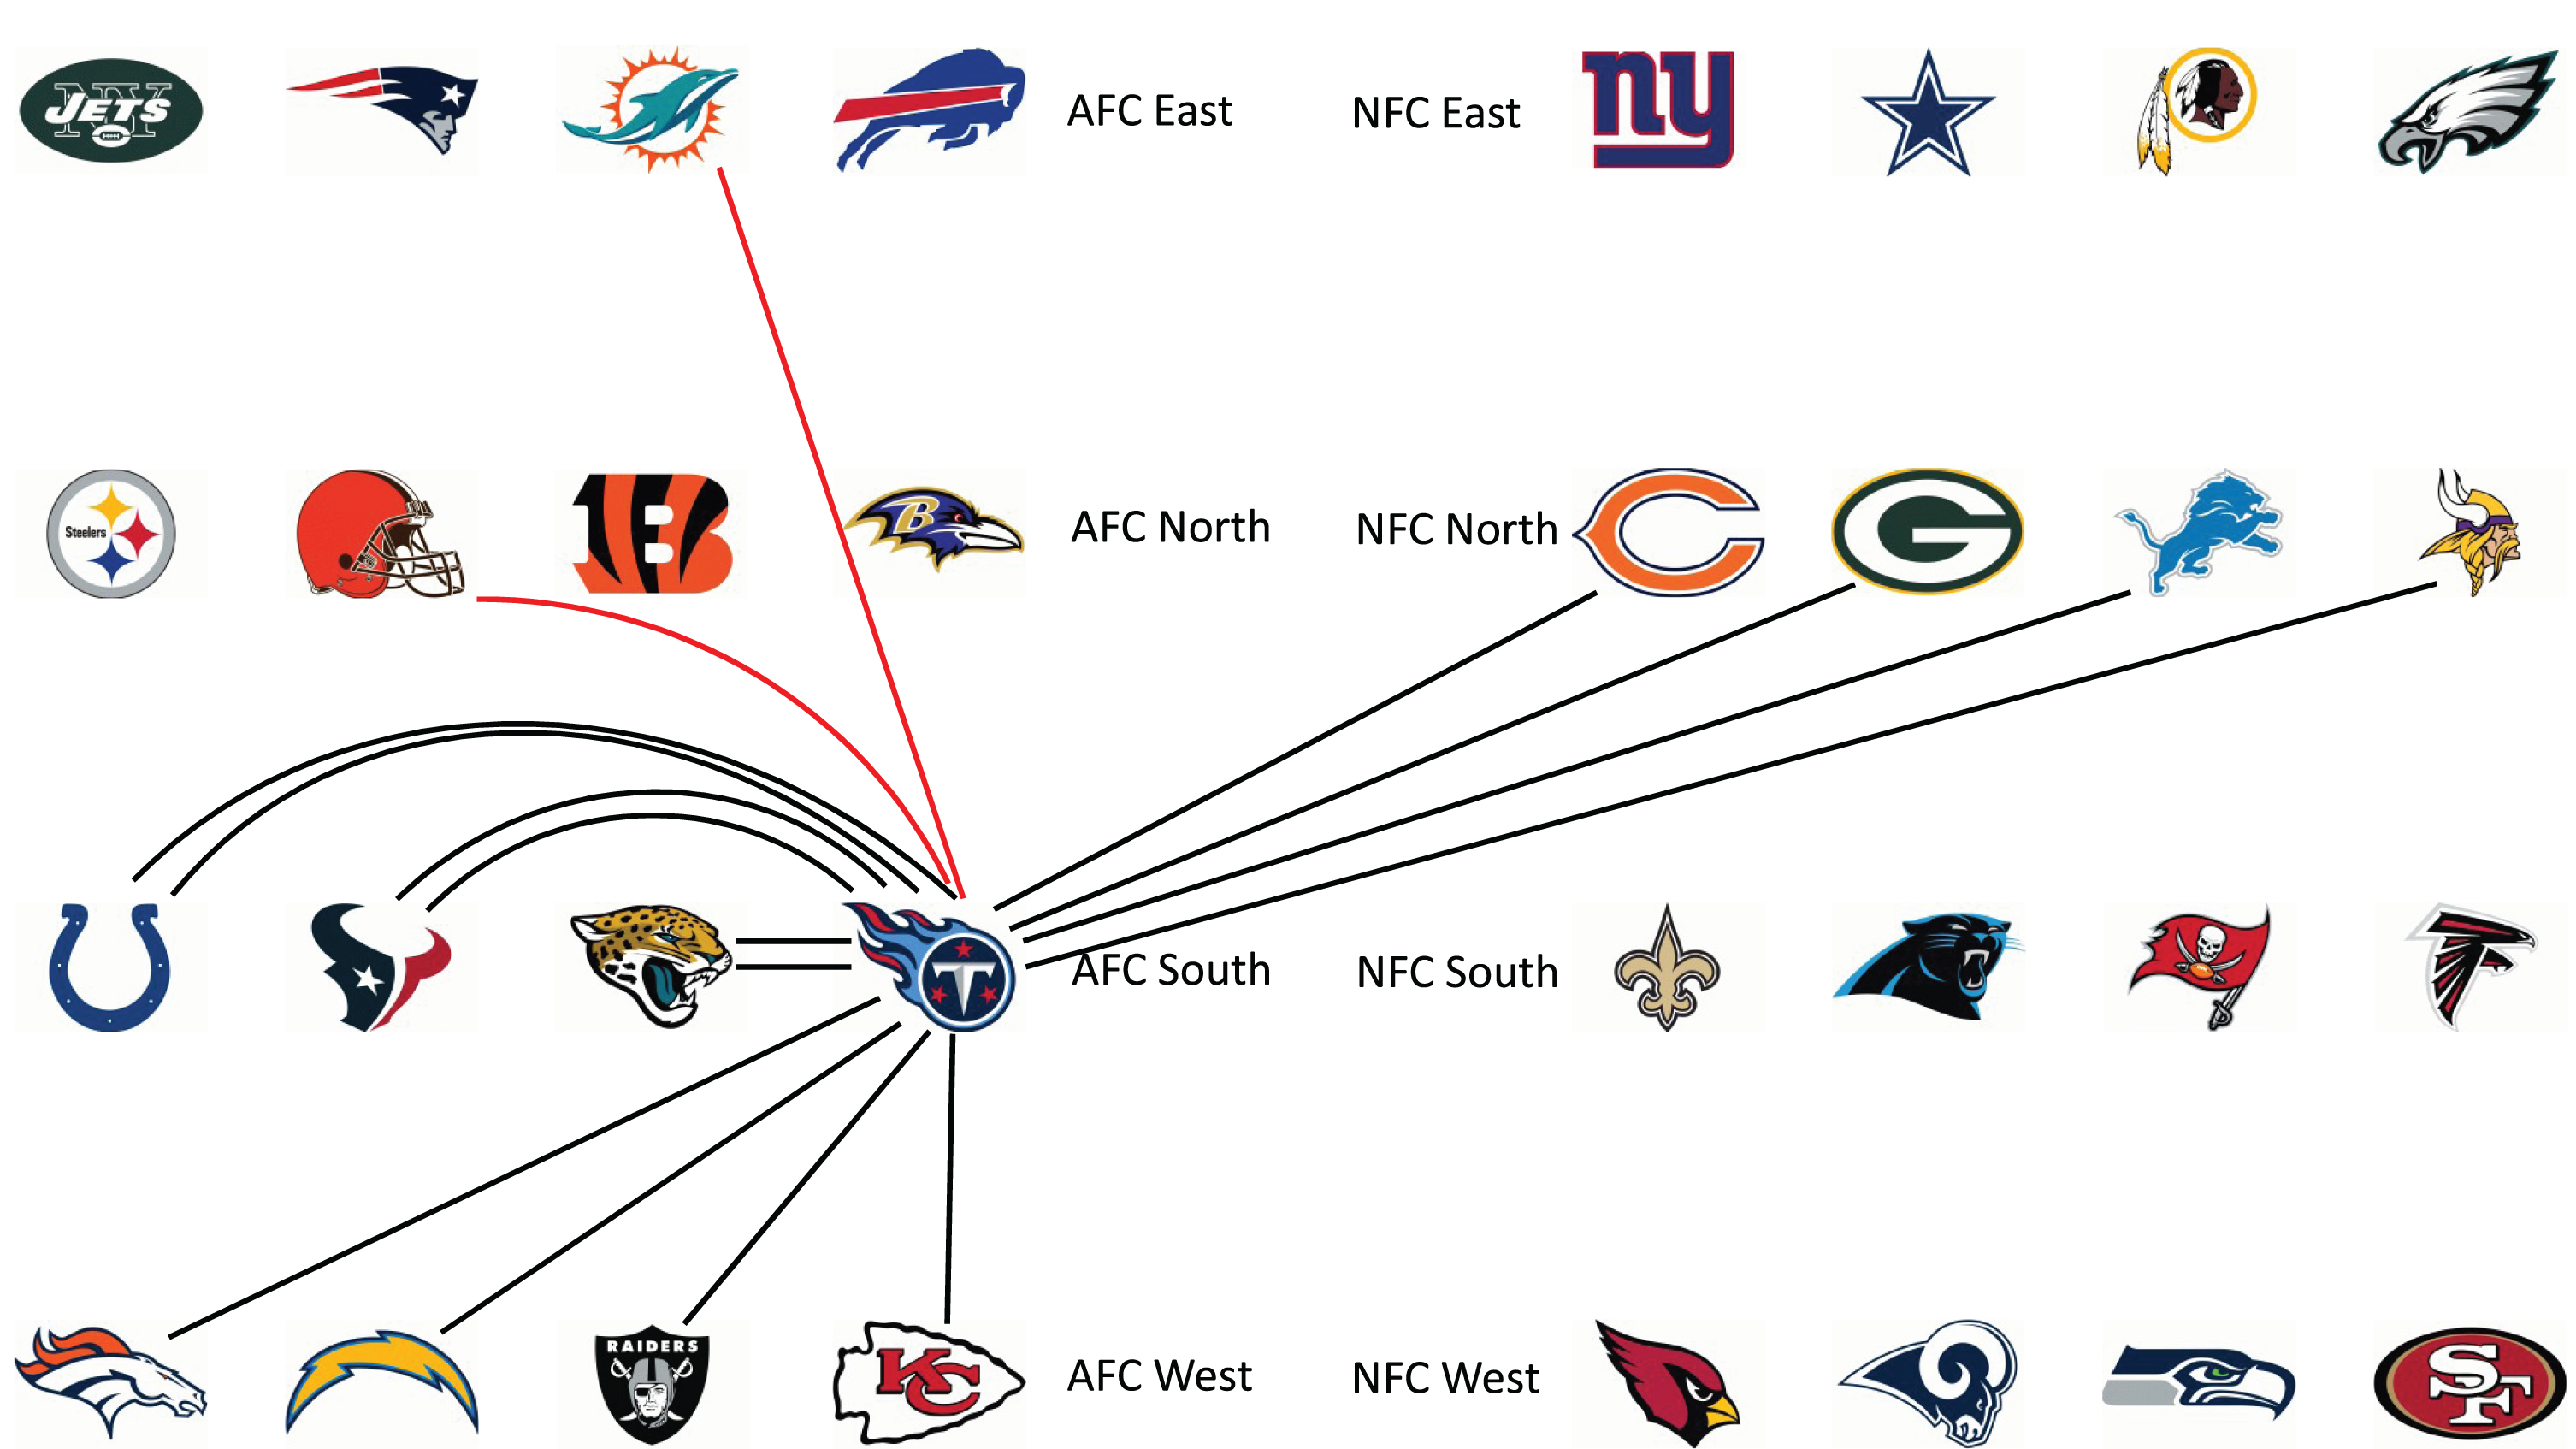 Tennessee Titans’ opponents in the 2016 NFL season with parity games shown in red.